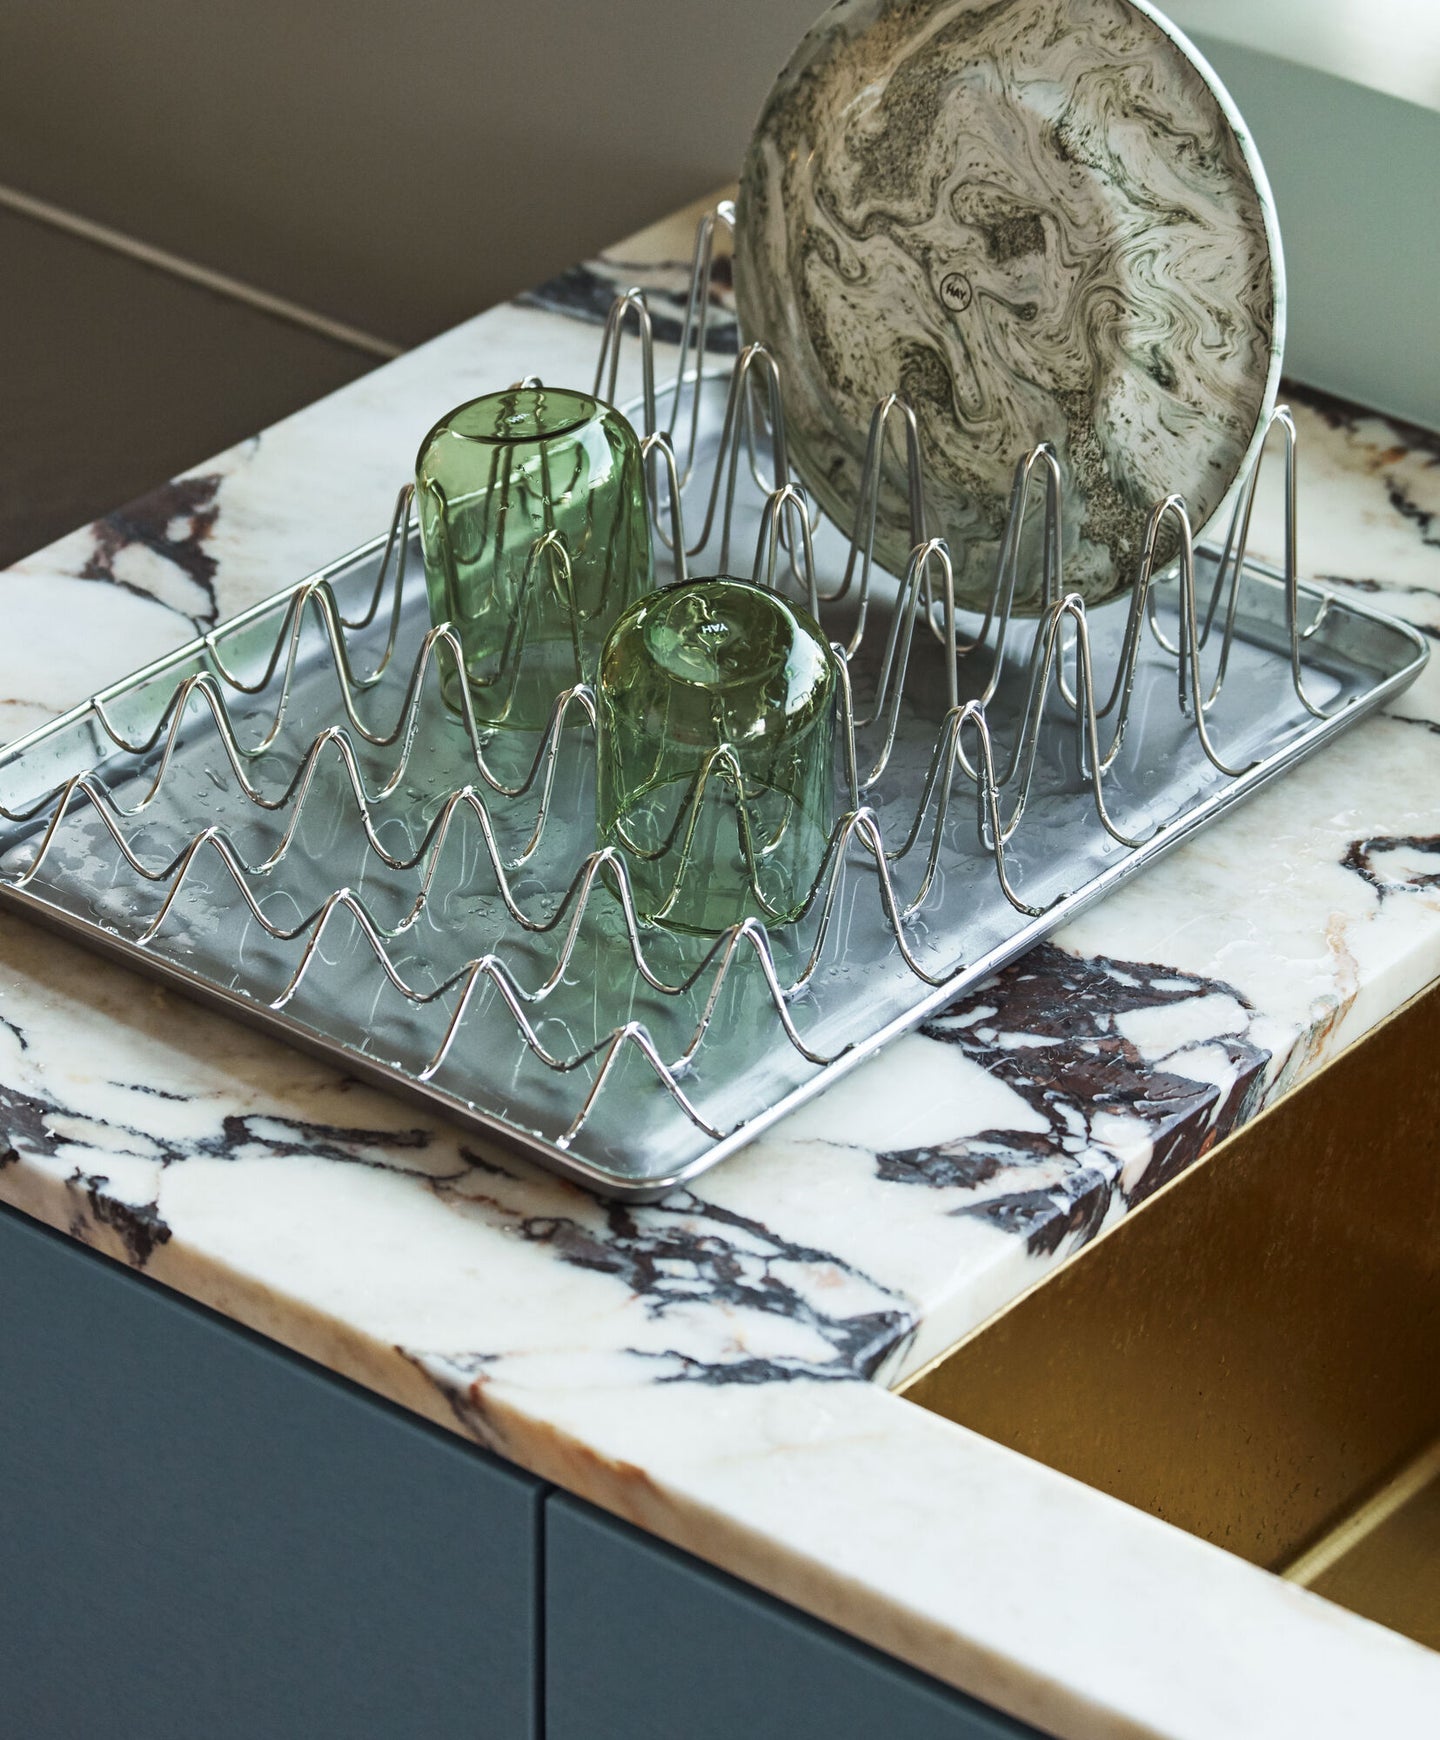 marble counter with stainless steel dish rack